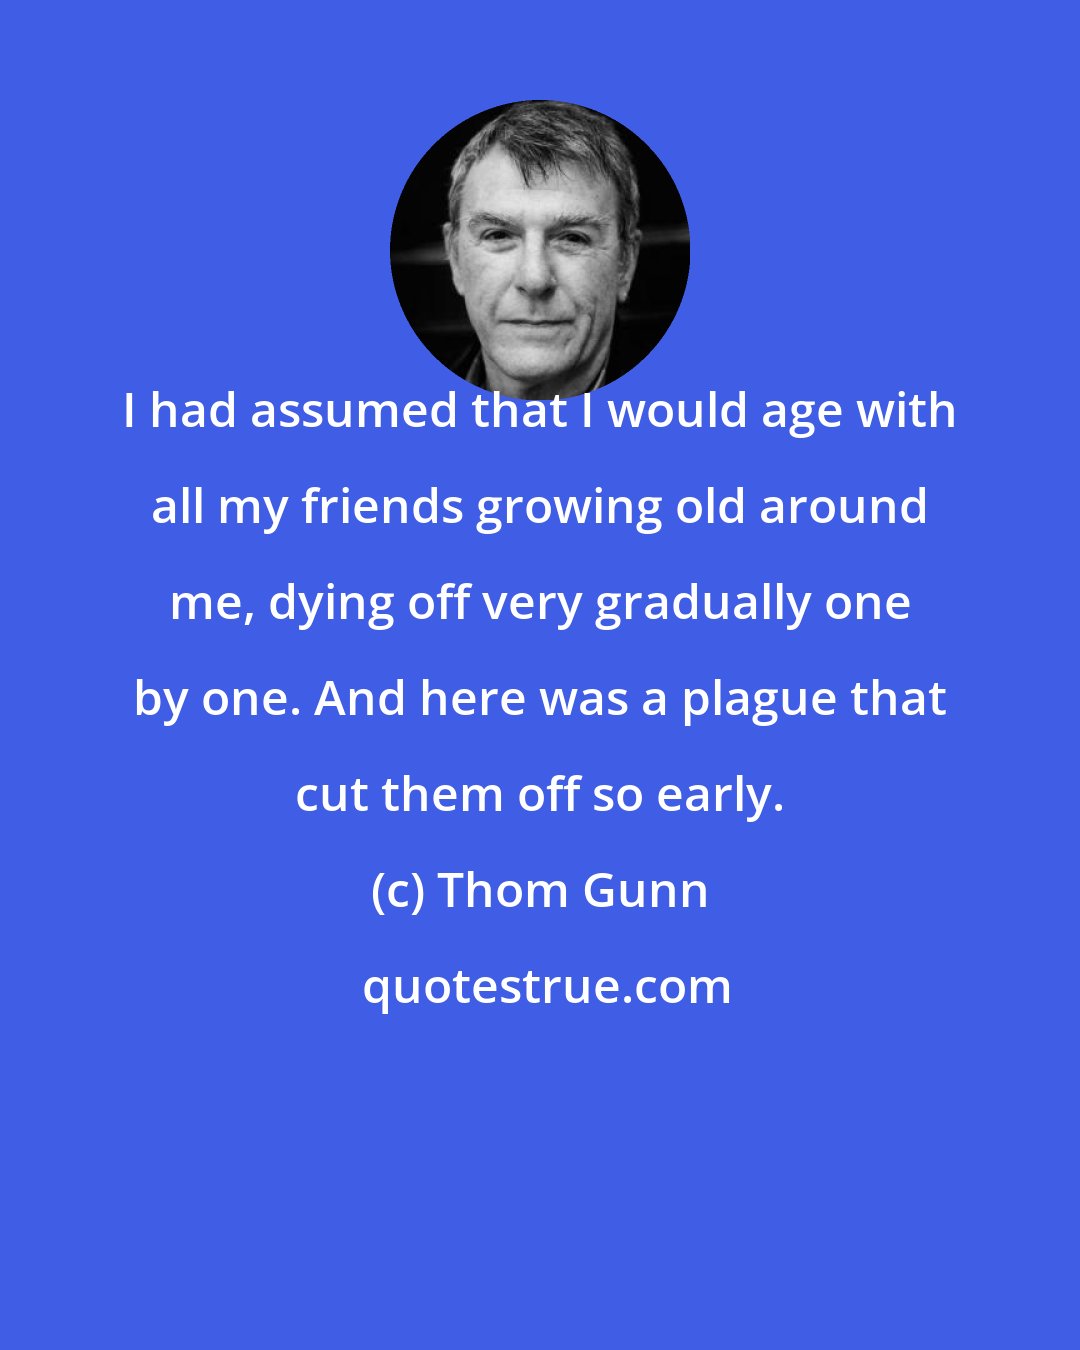 Thom Gunn: I had assumed that I would age with all my friends growing old around me, dying off very gradually one by one. And here was a plague that cut them off so early.